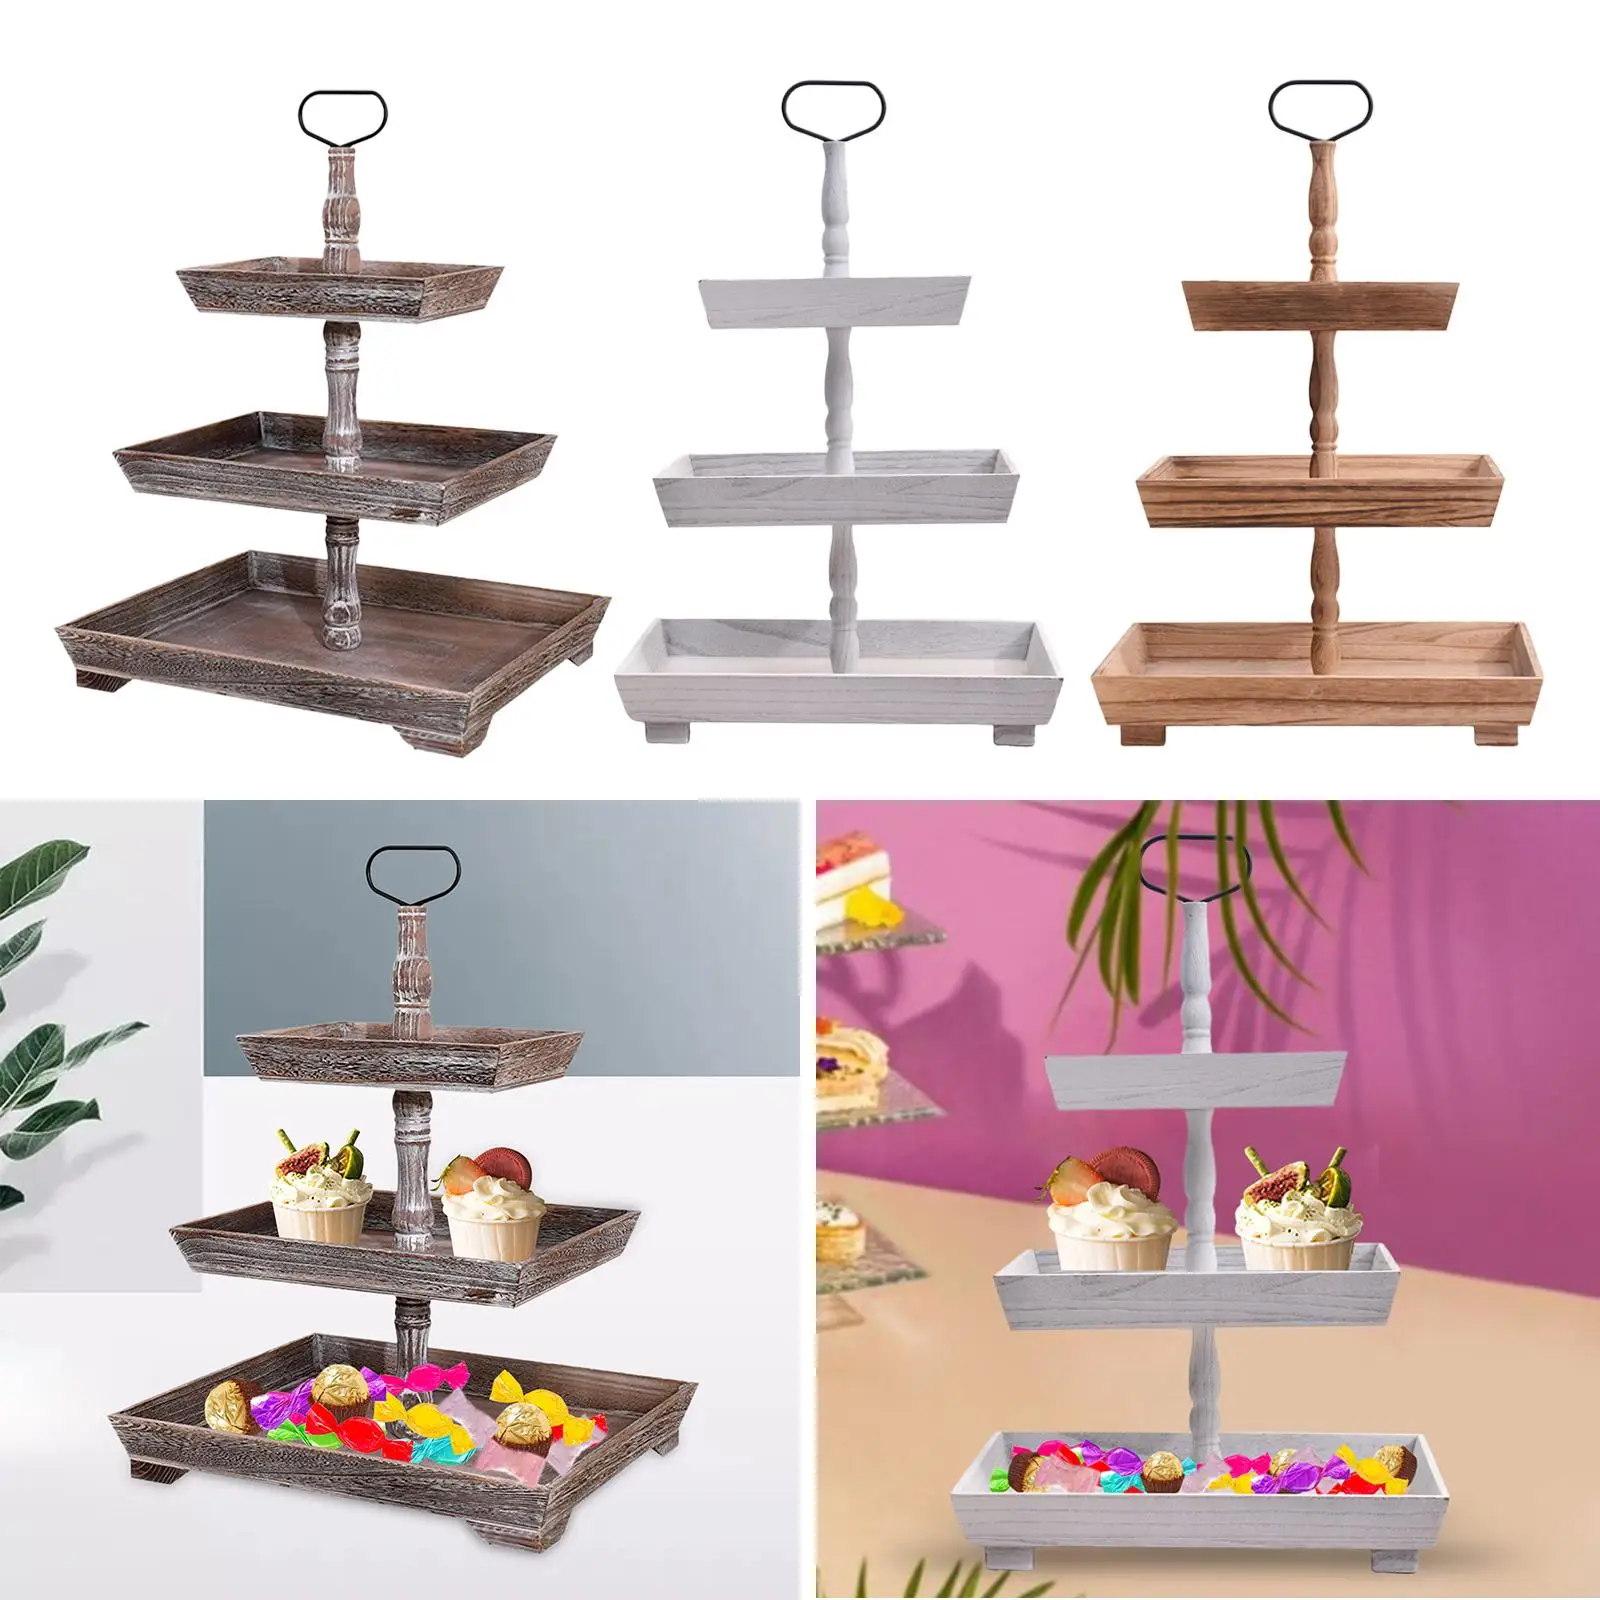 Wooden Tiered Serving Tray Cookie Plates Rectangle 3 Tier Fruit Display Stand for Kitchen